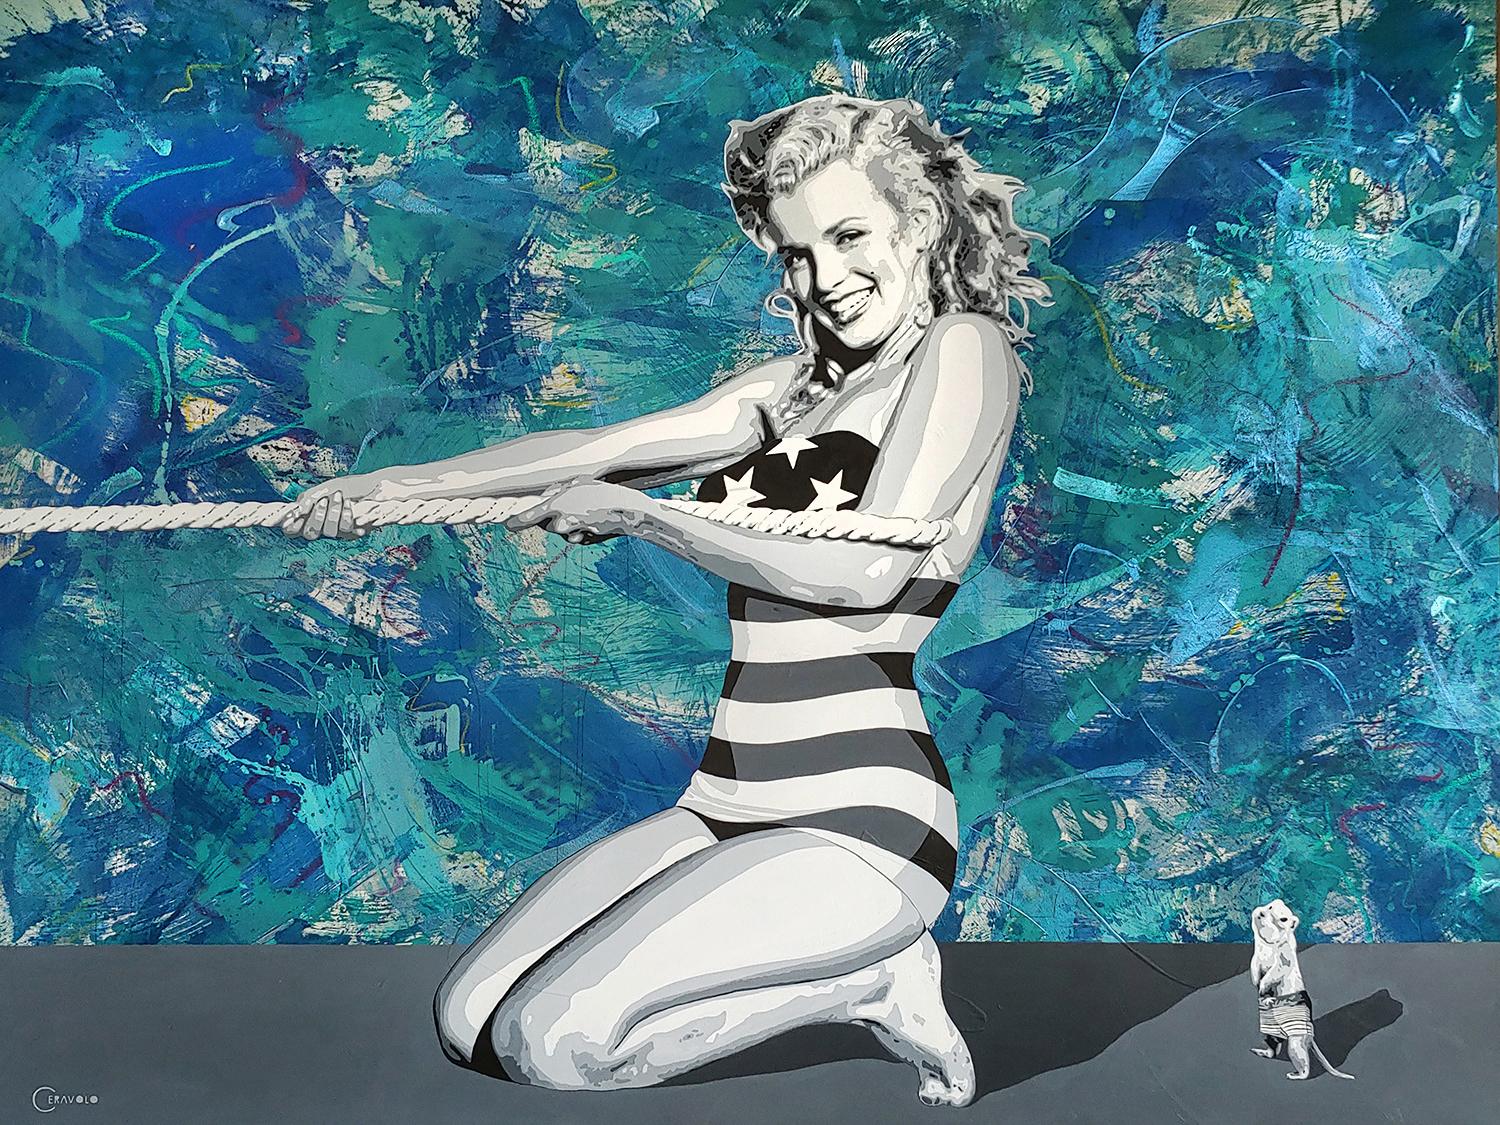 Figurative Painting Ceravolo - Jeune Marilyn at the Beach tug of war, grand format 68x88 Huile et acrylique sur toile